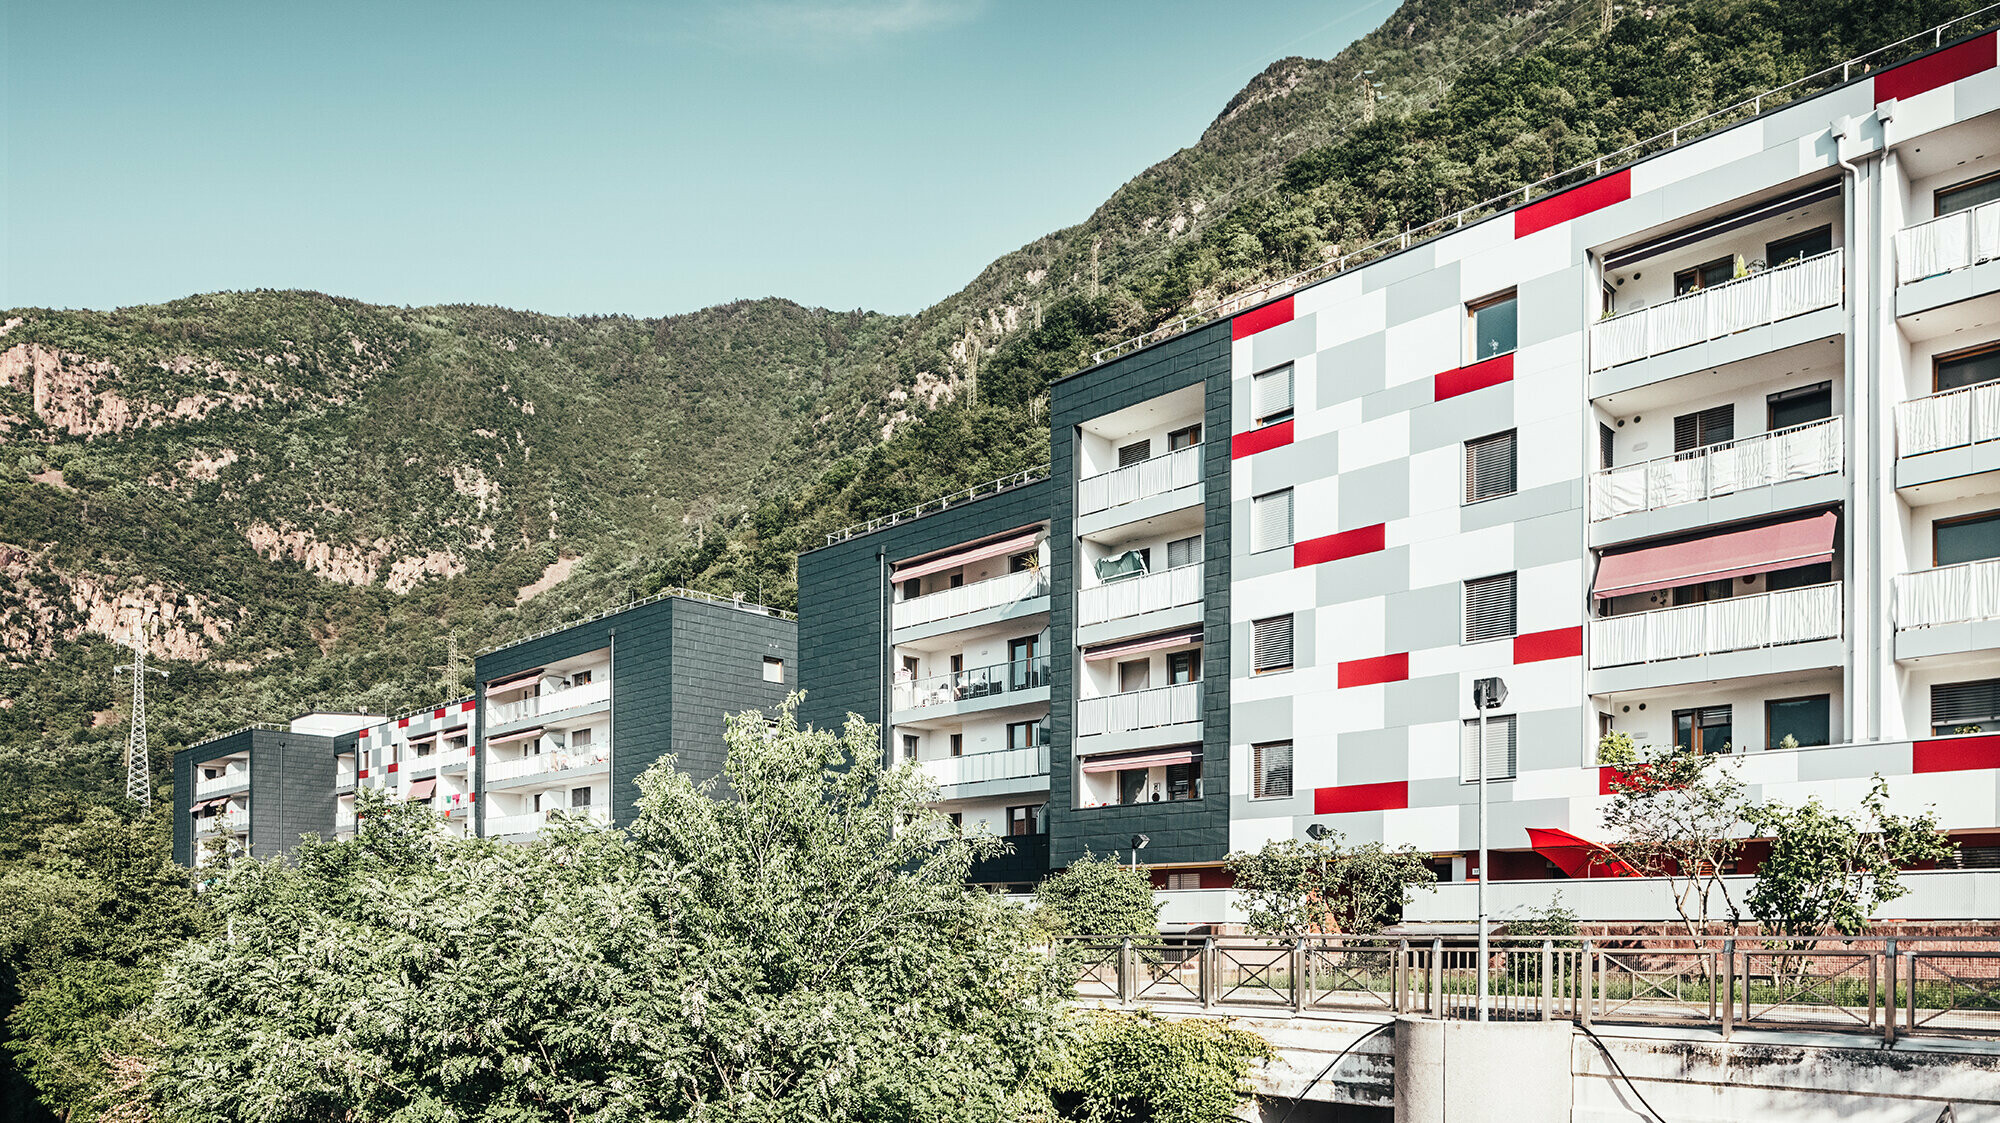 The result of the thermal refurbishment on Köstenweg: on the left, the anthracite-coloured PREFA façade panels, on the right, white, grey and red façade surfaces.